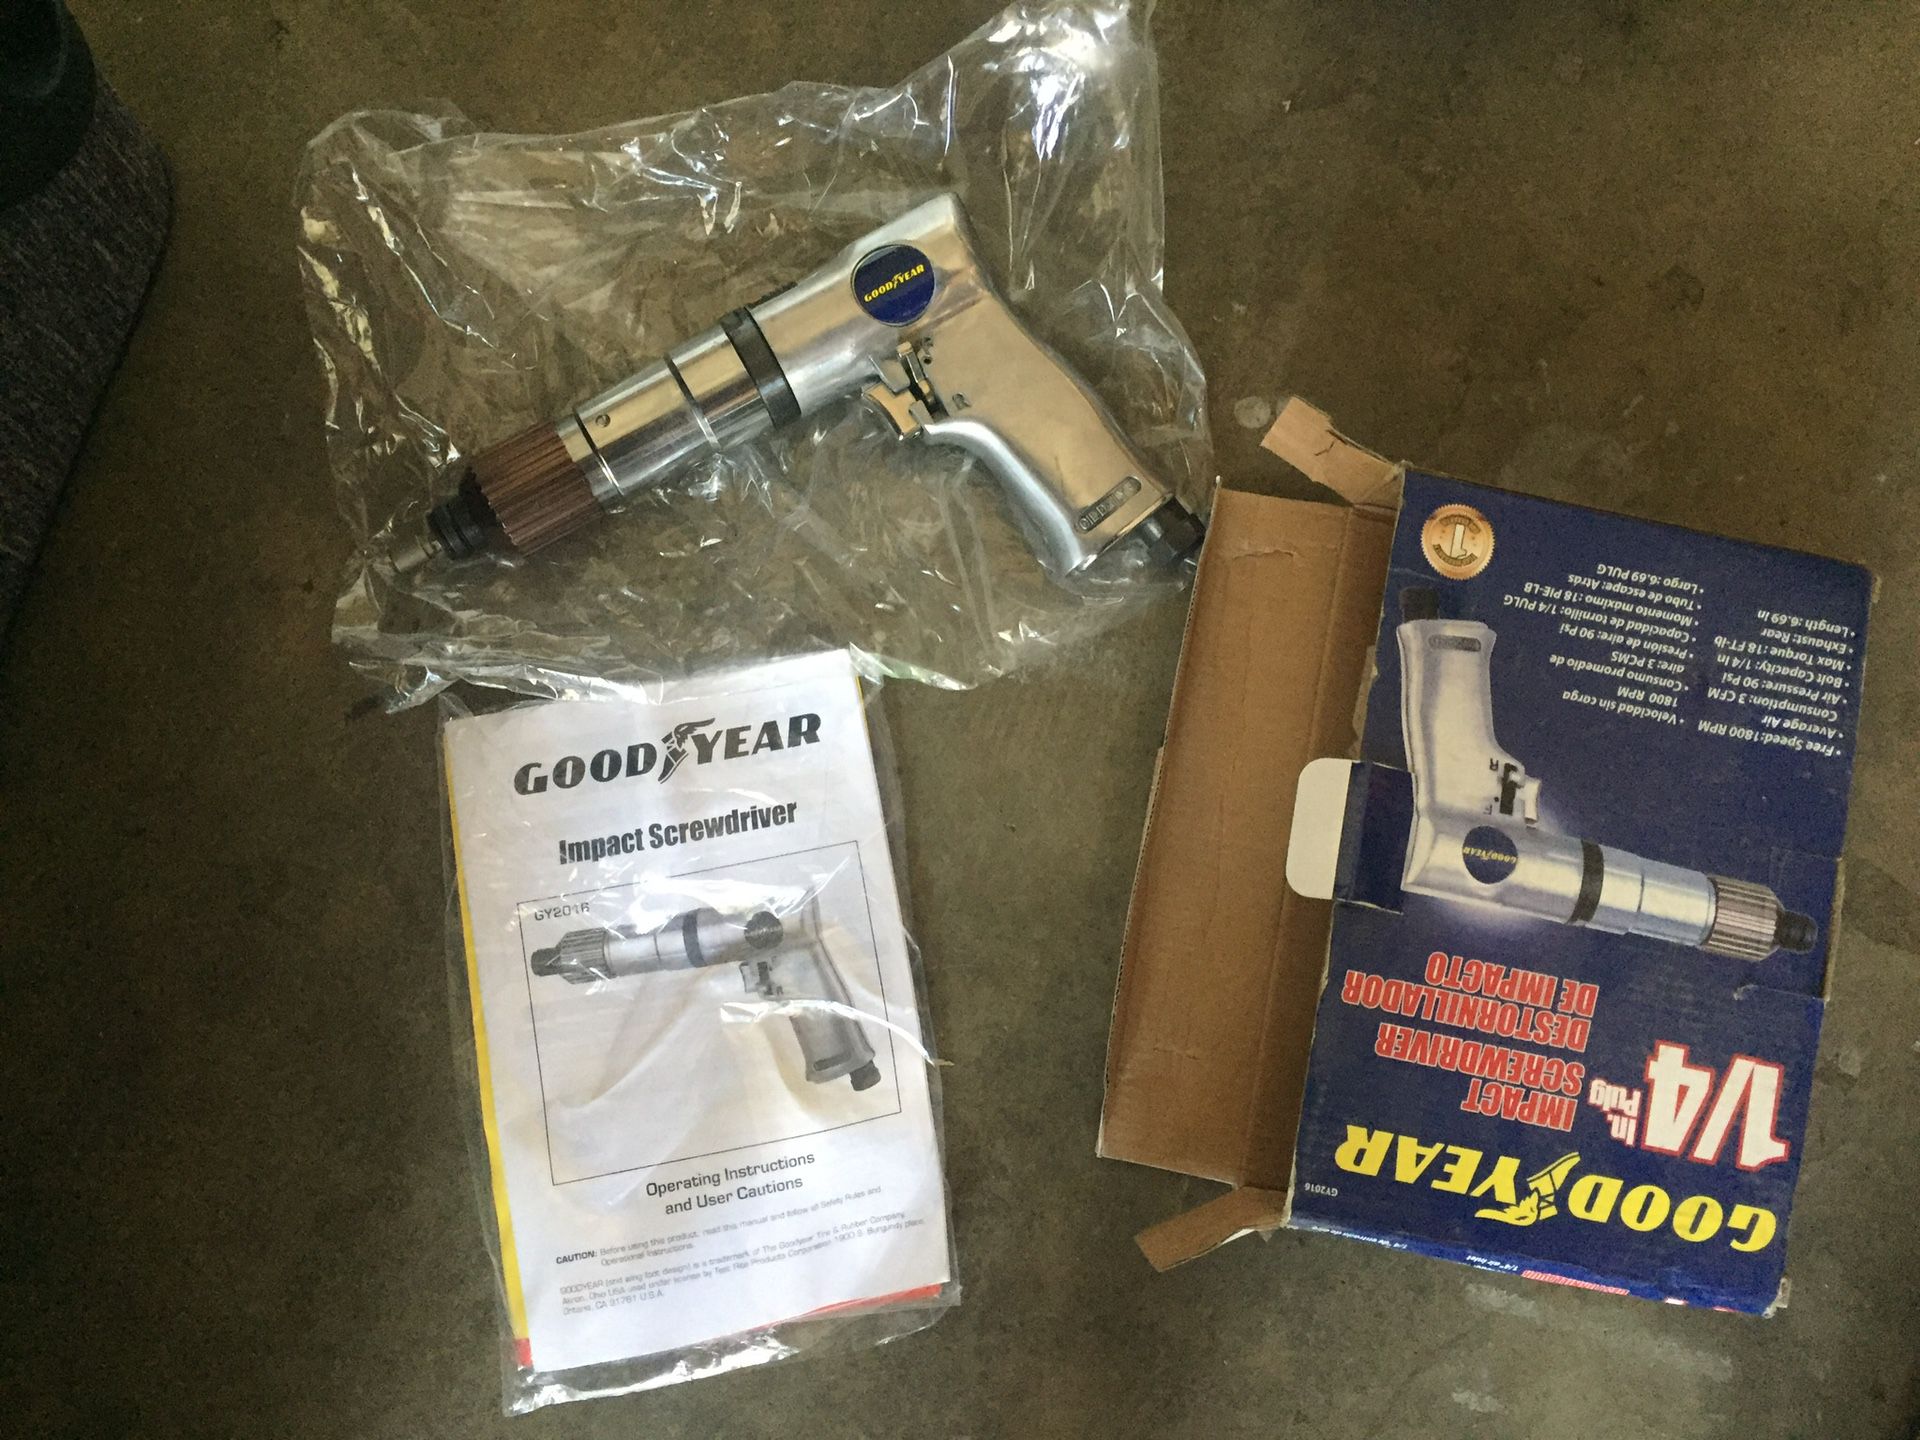 Air tools. Goodyear. Impact screwdriver and air hammer with bits. Brand new in box.